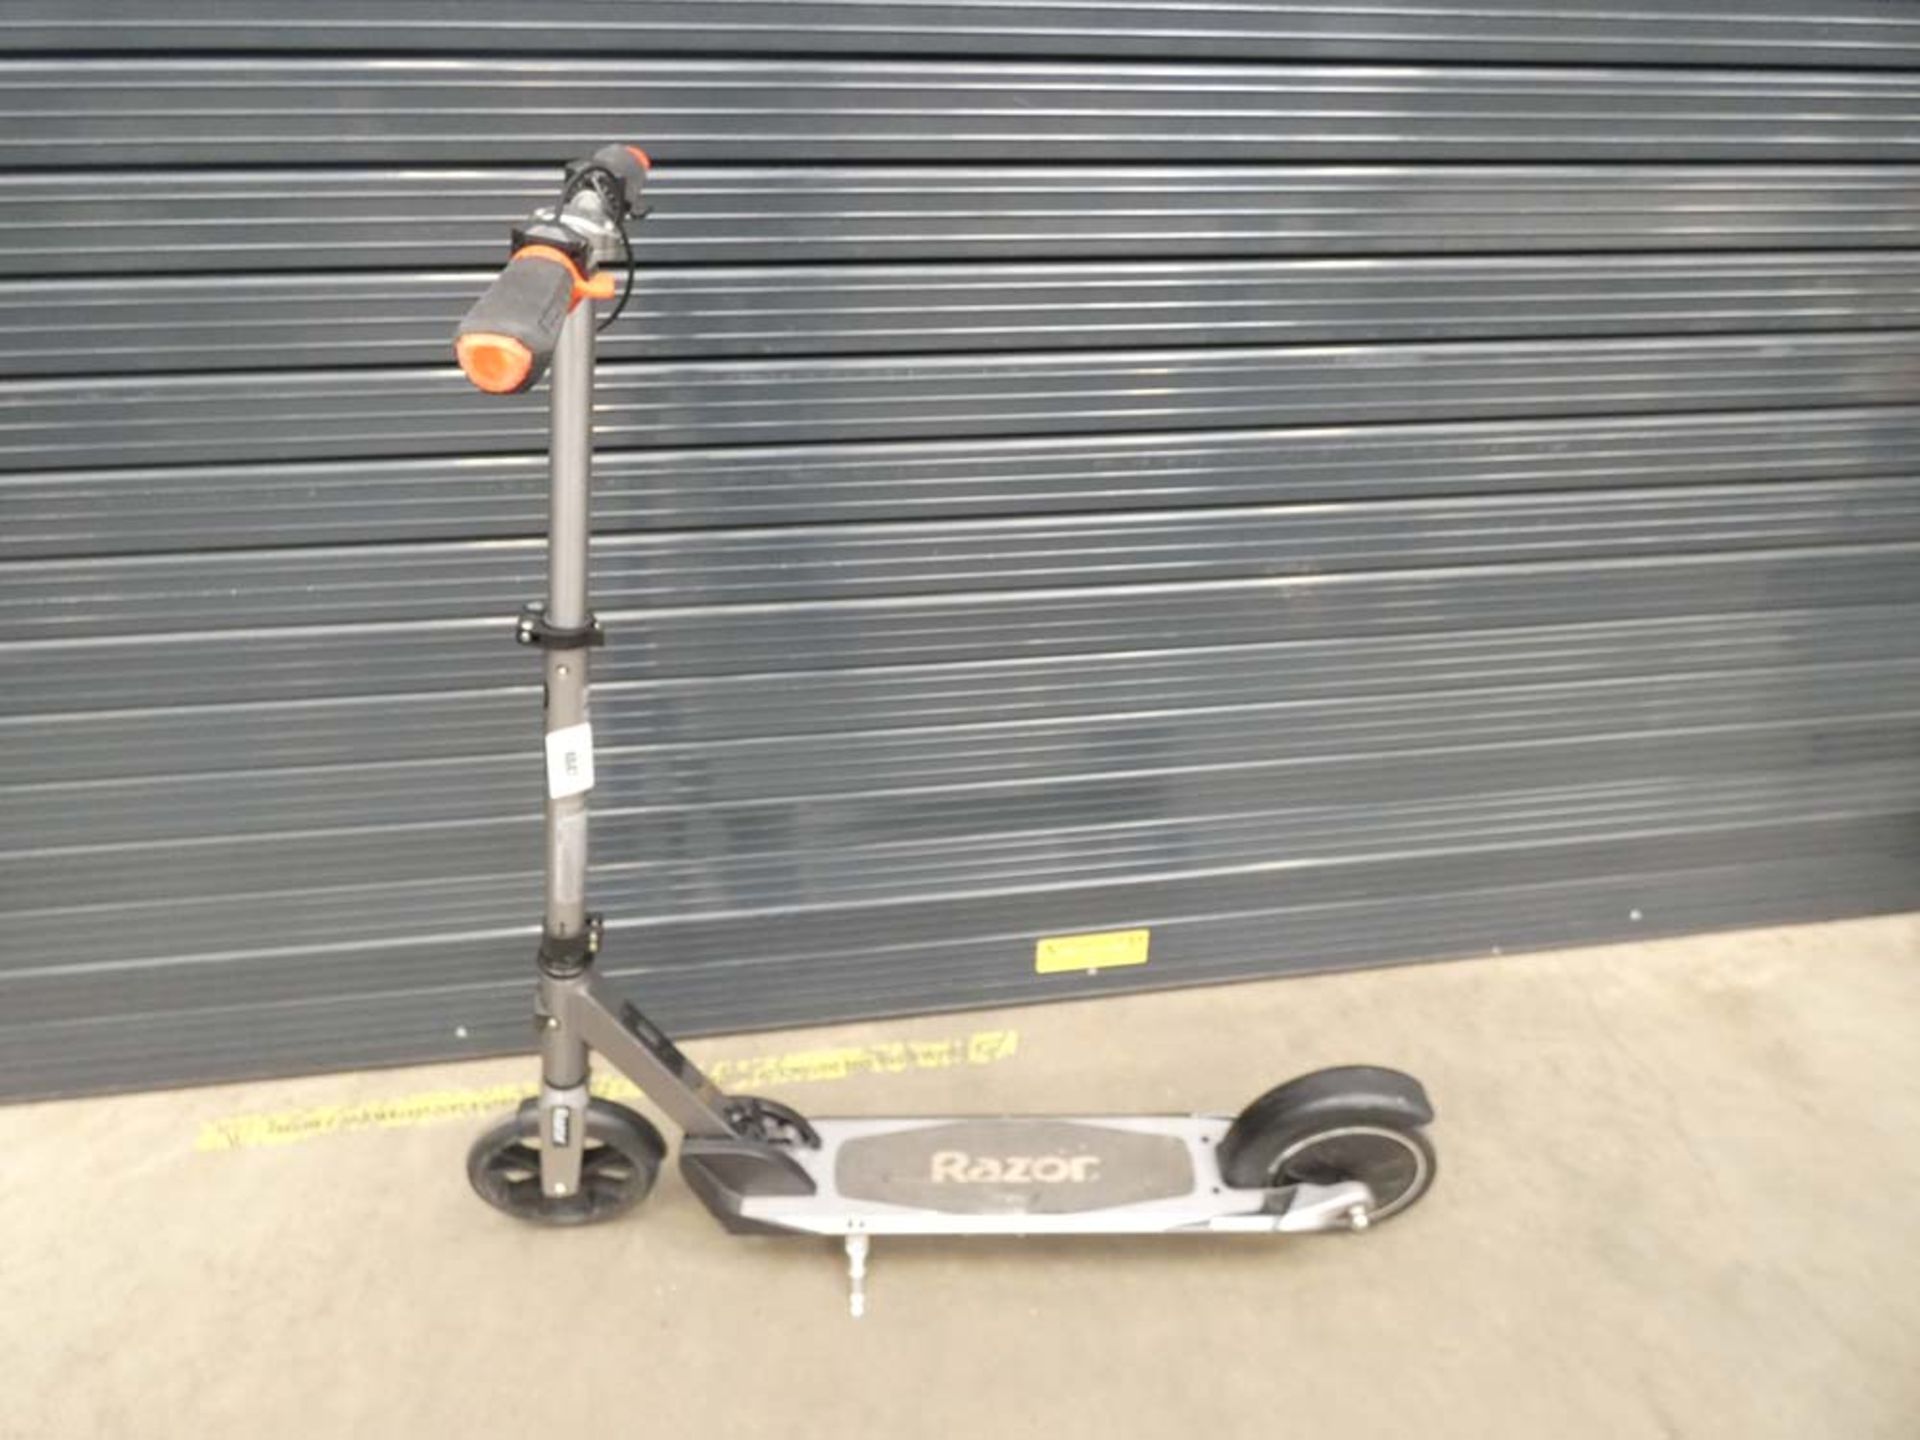 Razor electric scooter no charger